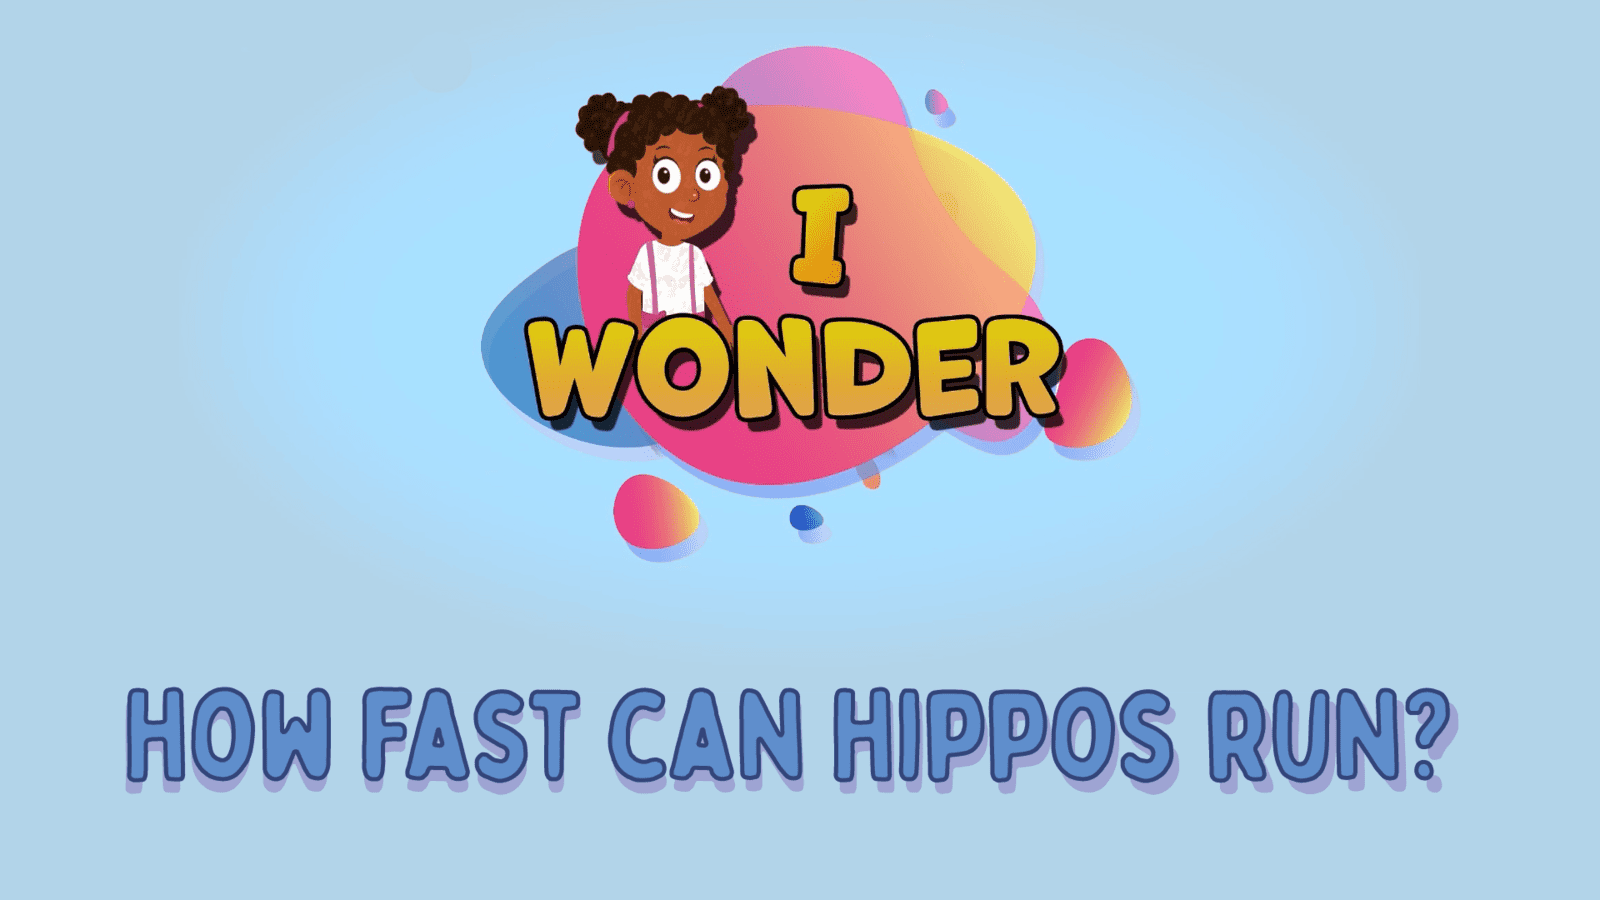 How Fast Can Hippos Run?